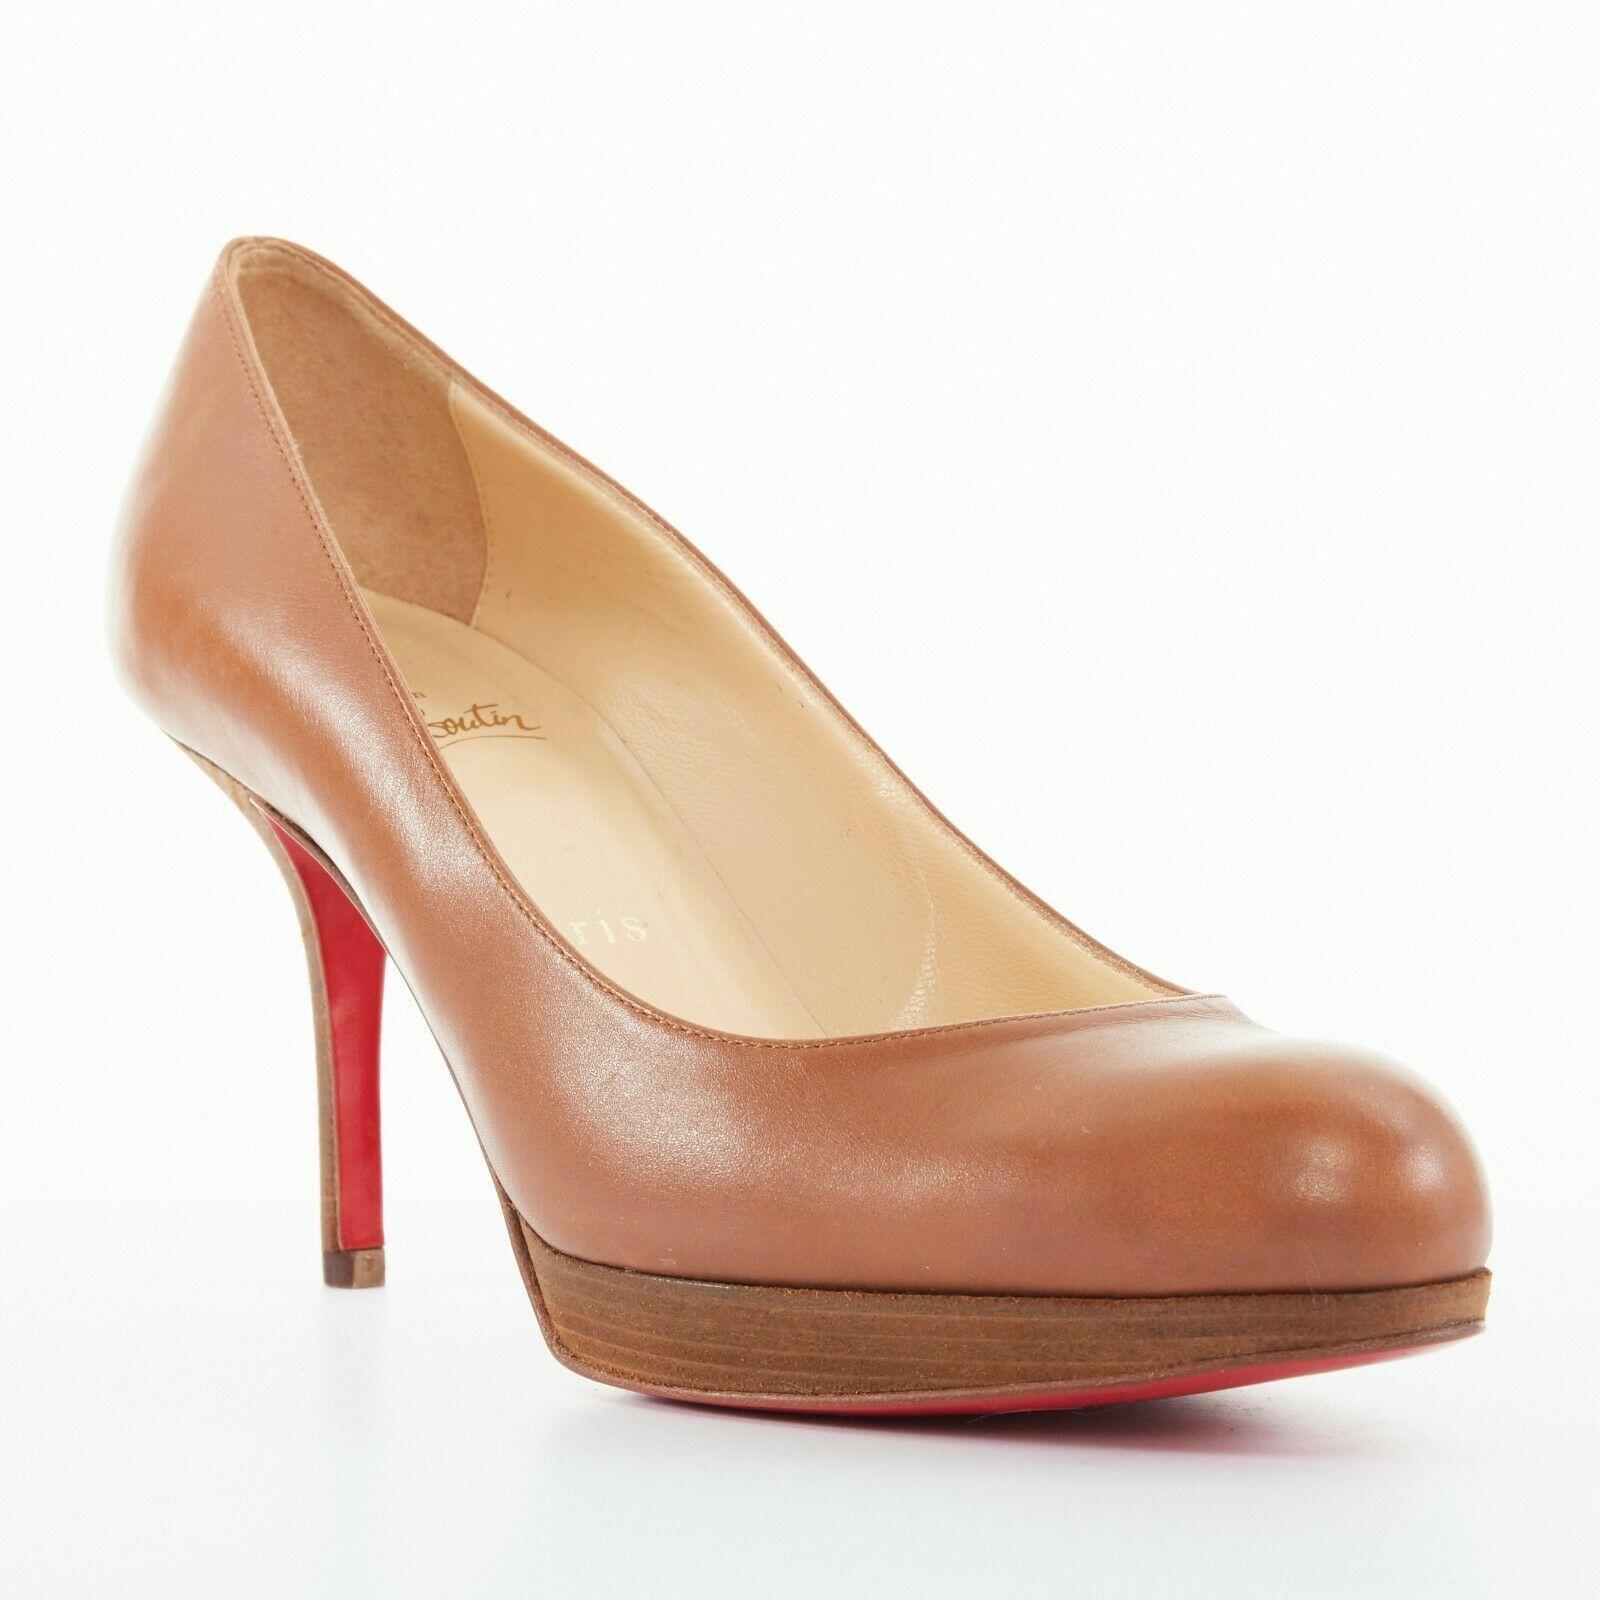 new CHRISTIAN LOUBOUTIN Prorata 90 Wood brown round toe platform heels 37.5
CHRISTIAN LOUBOUTIN
Prorata. 
Brown leather upper. 
Natural wooden platform and heel. 
Round toe. 
Tonal stitching. 
Signature Christian Louboutin red lacquared leather